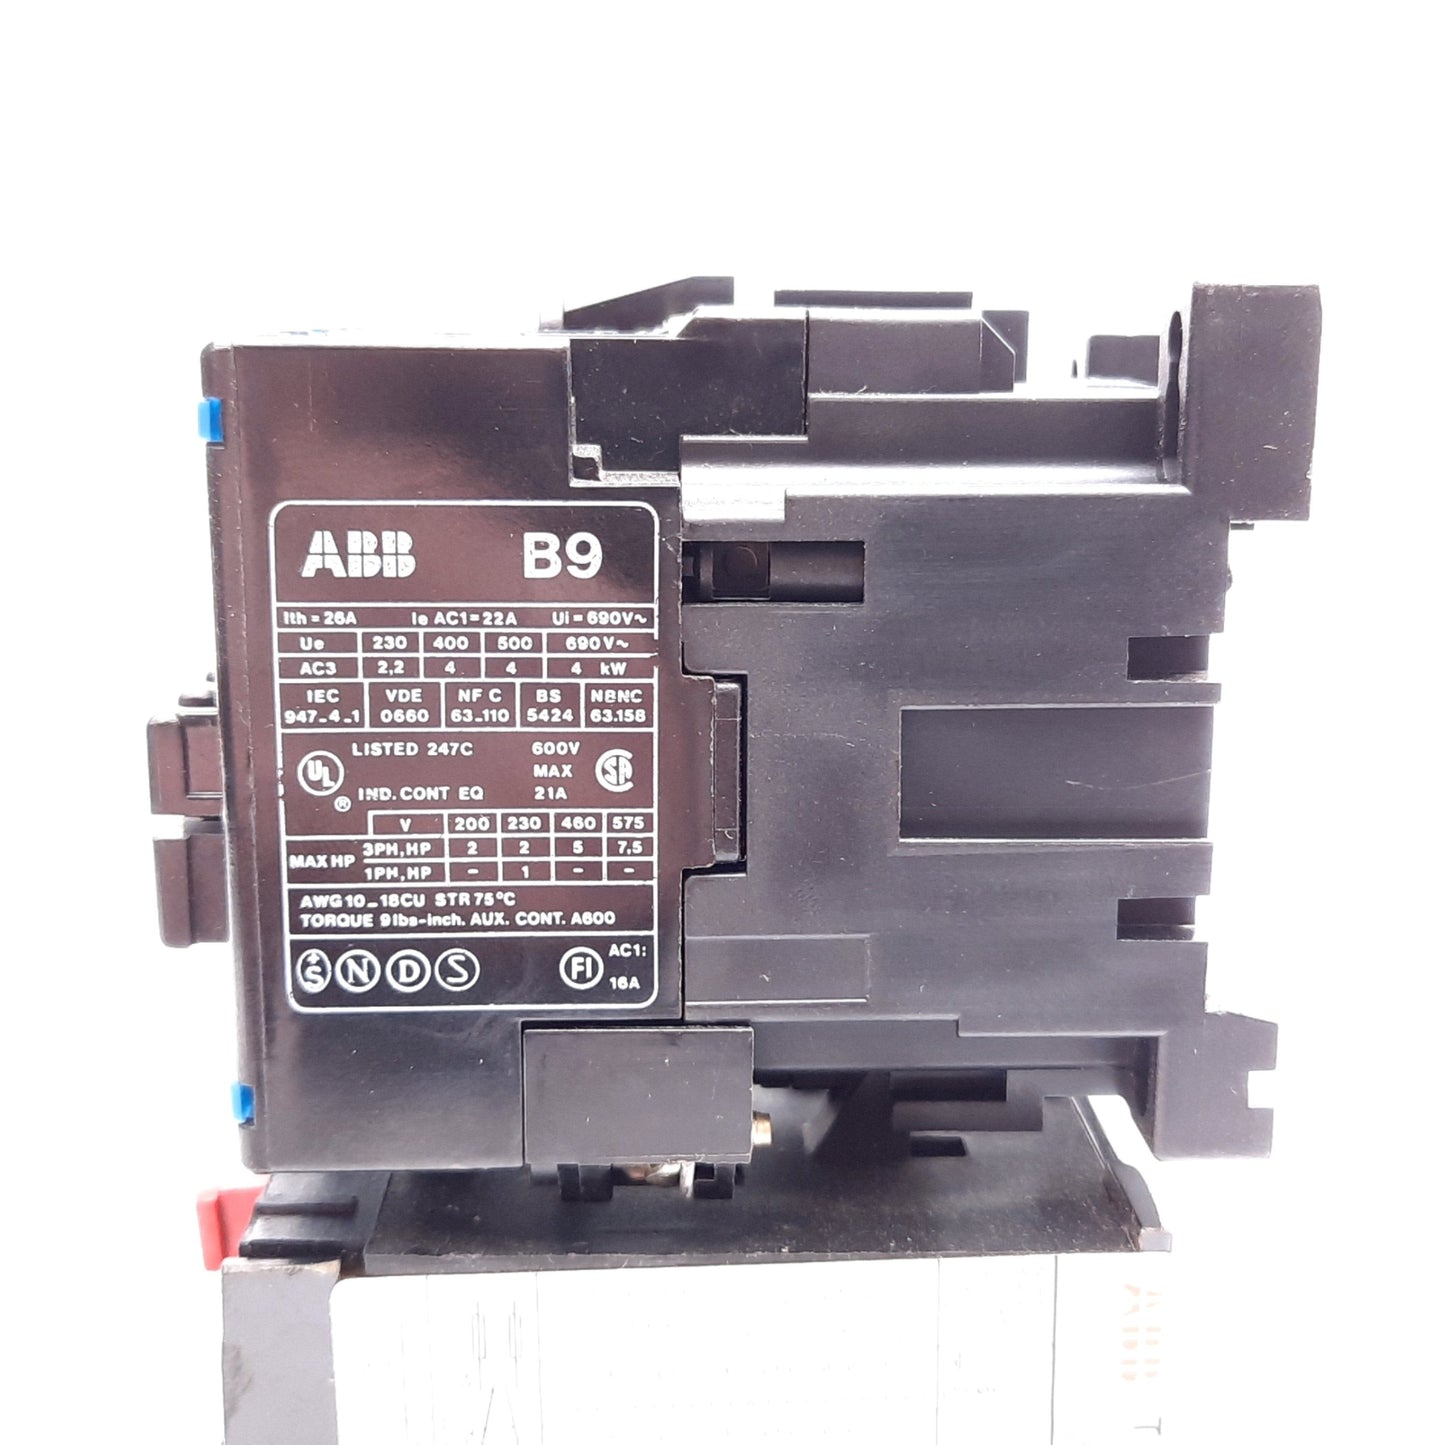 Used ABB B9-30-10 Contactor, 3-Pole, 220-240VAC Coil w/ Overload Relay 1.1-1.5A